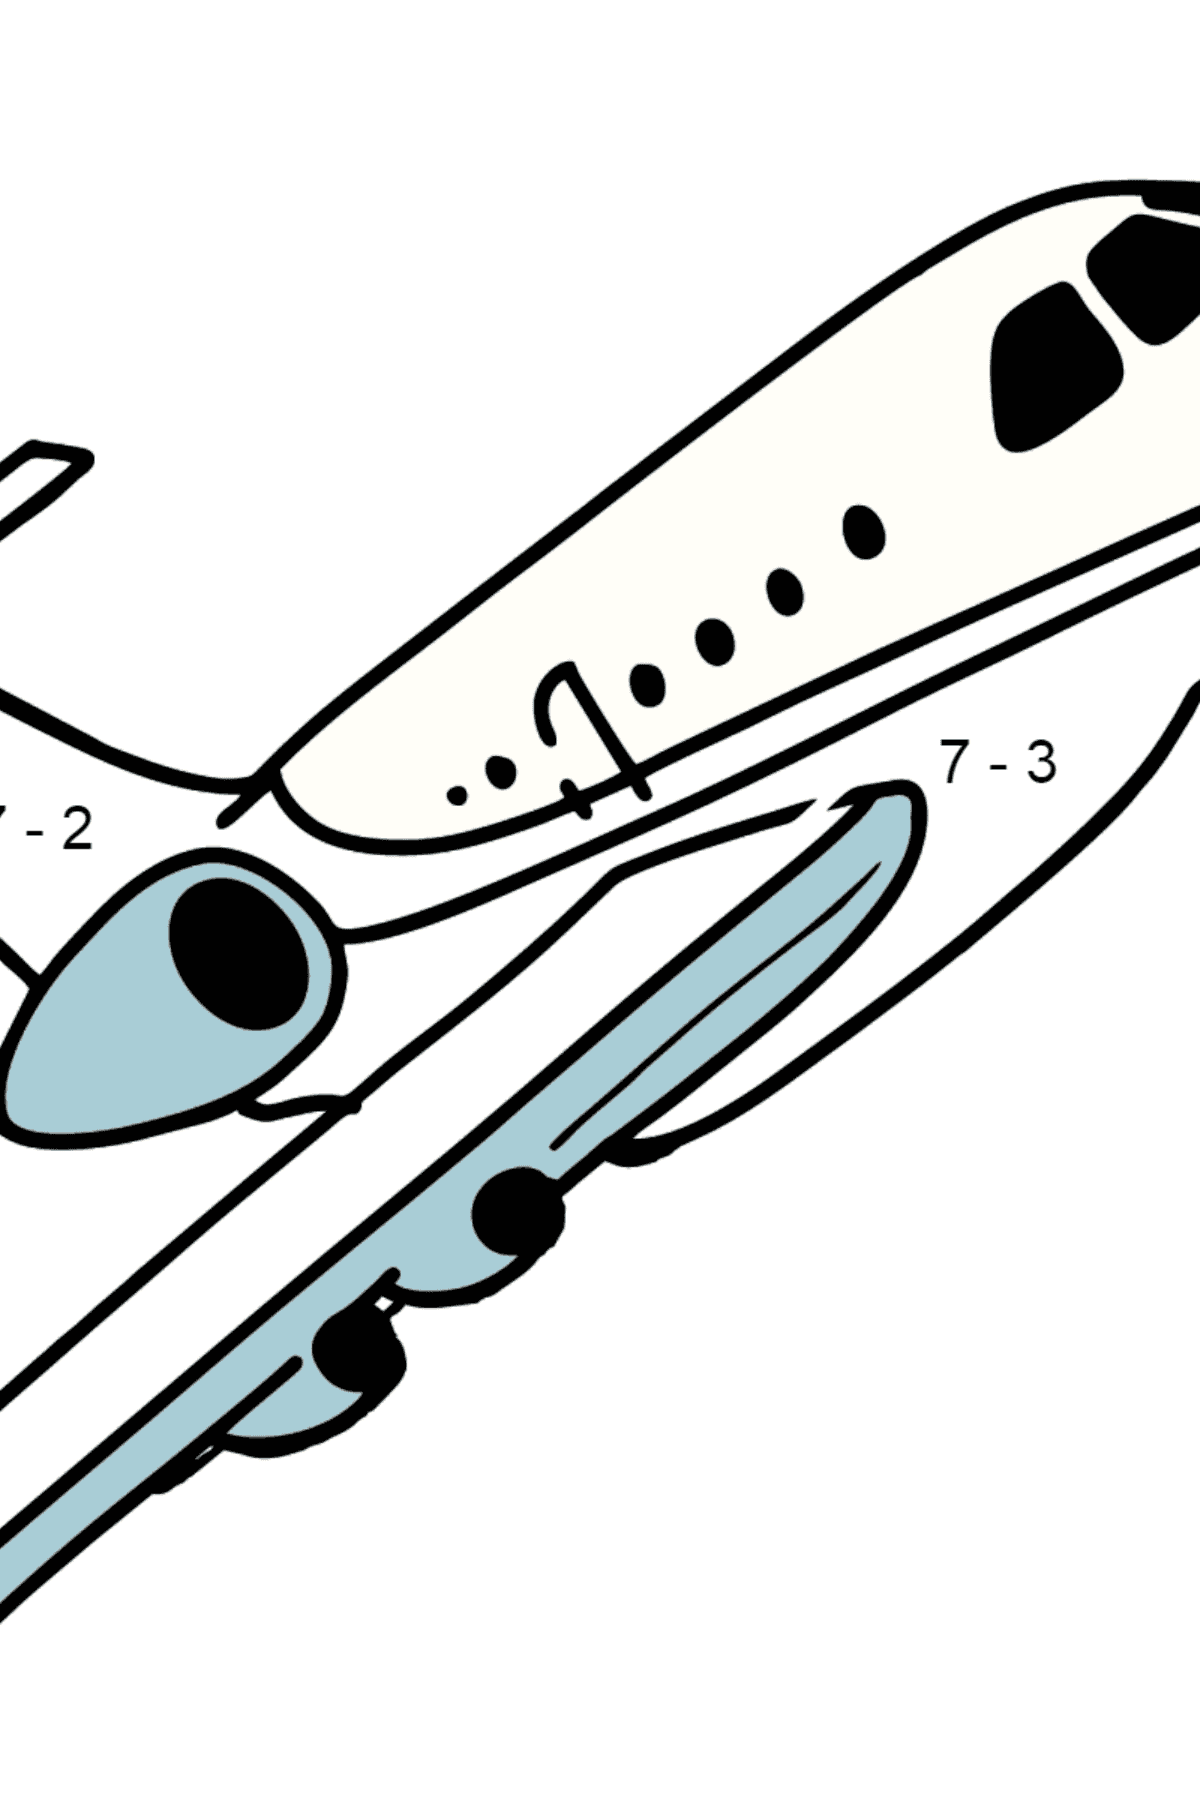 Airbus Airplane coloring page - Math Coloring - Subtraction for Kids